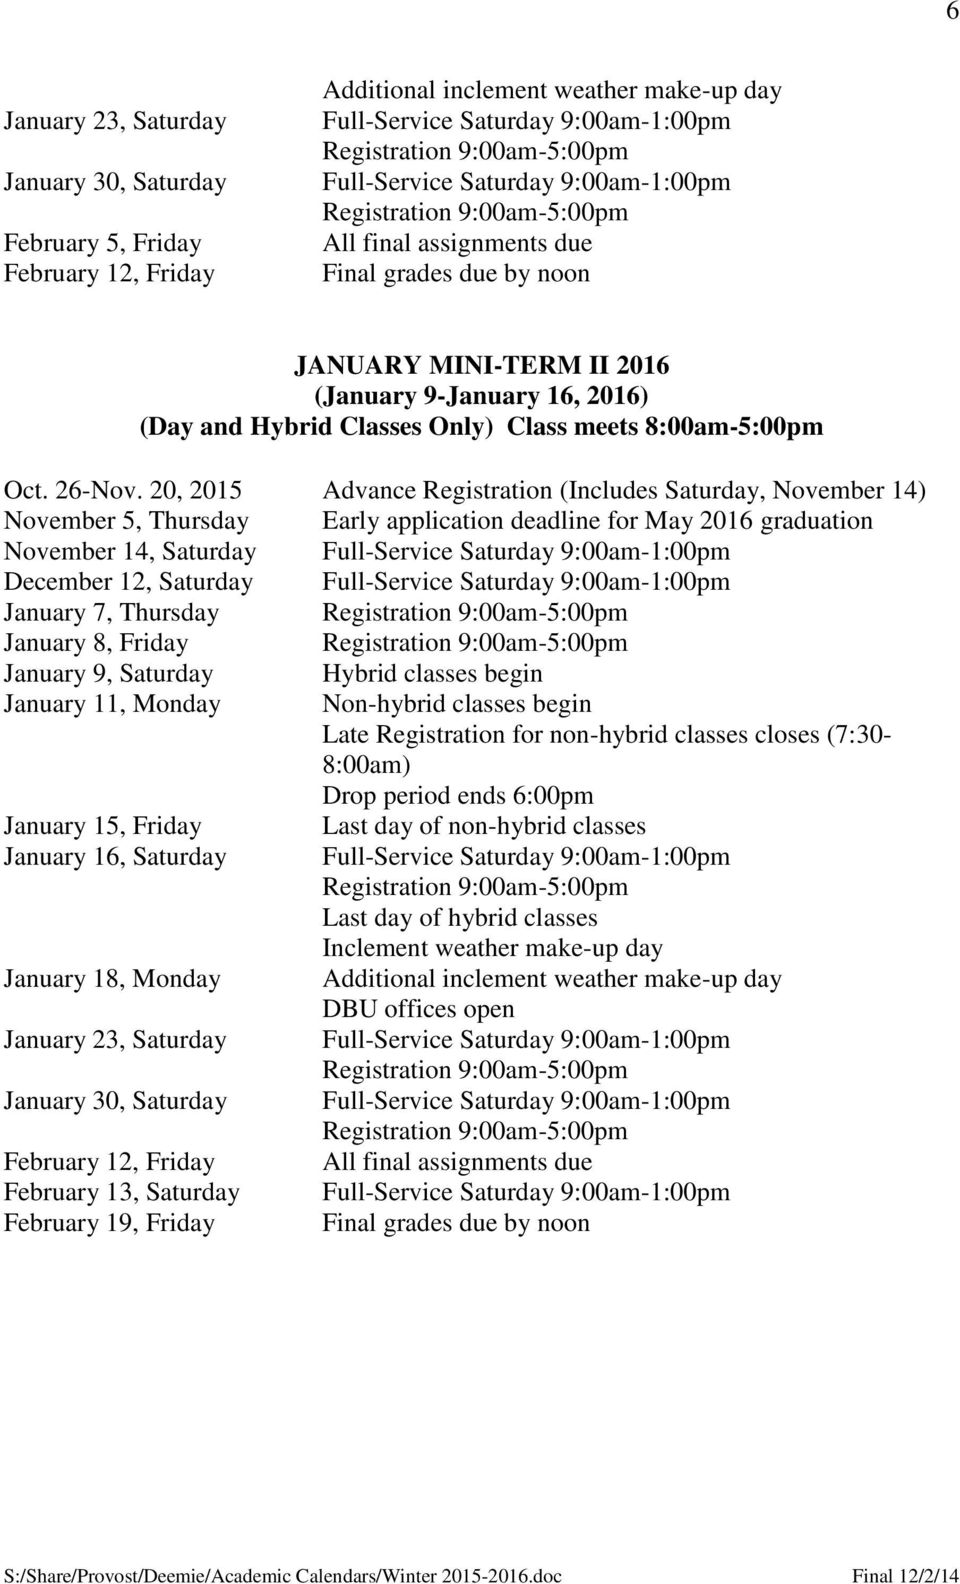 classes begin January 11, Monday Non-hybrid classes begin Late Registration for non-hybrid classes closes (7:30-8:00am) Drop period ends 6:00pm January 15, Friday Last day of non-hybrid classes